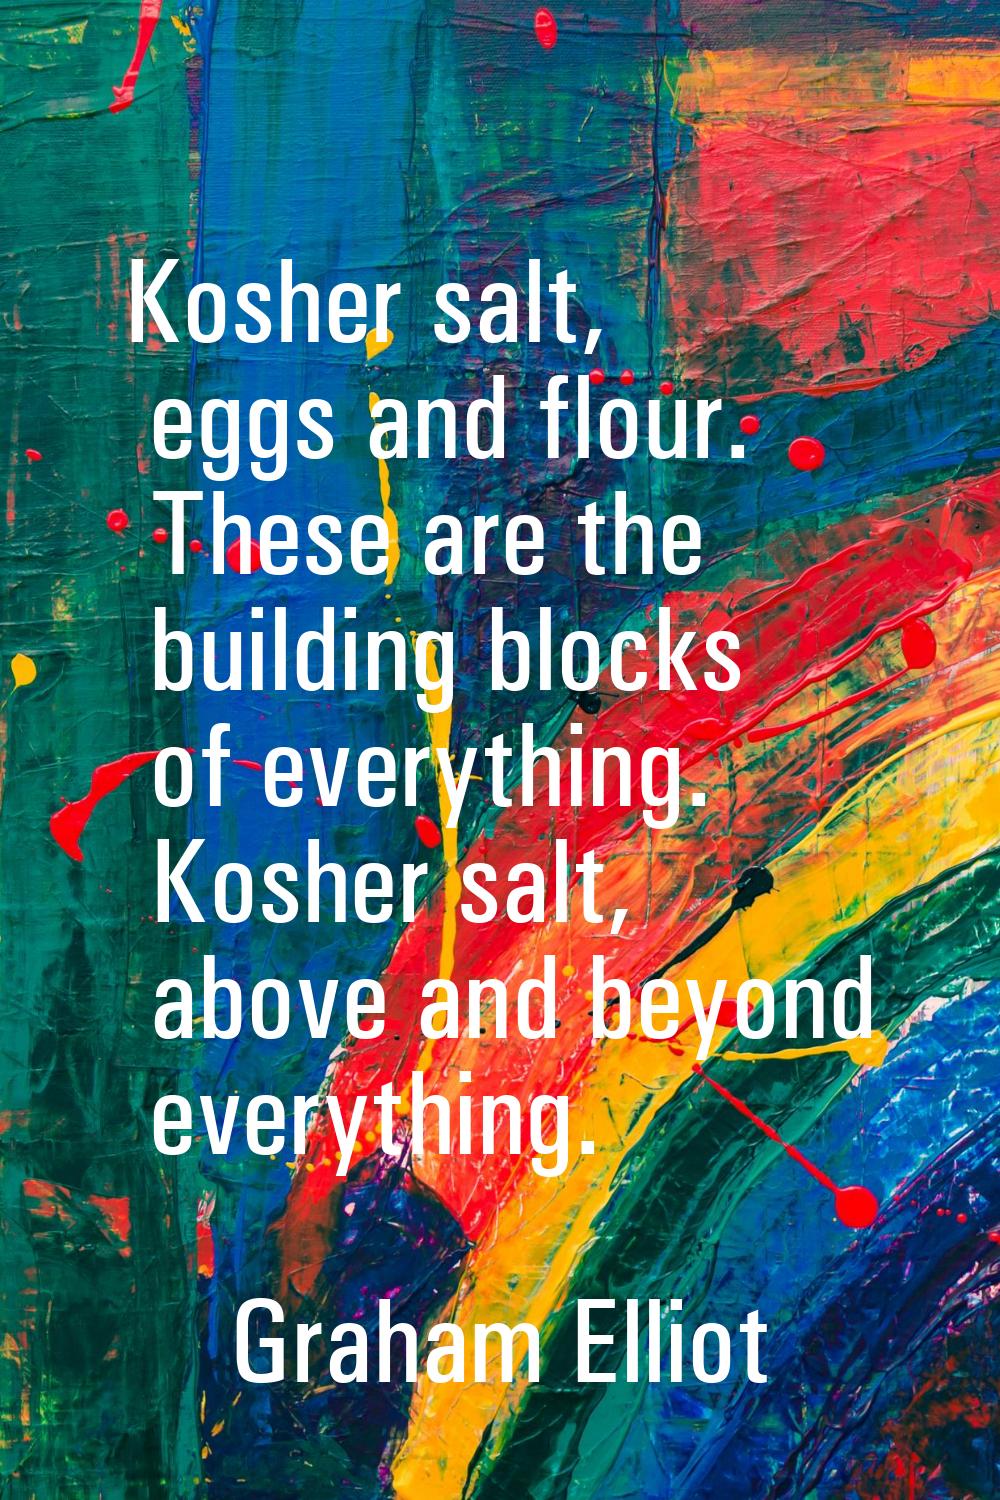 Kosher salt, eggs and flour. These are the building blocks of everything. Kosher salt, above and be